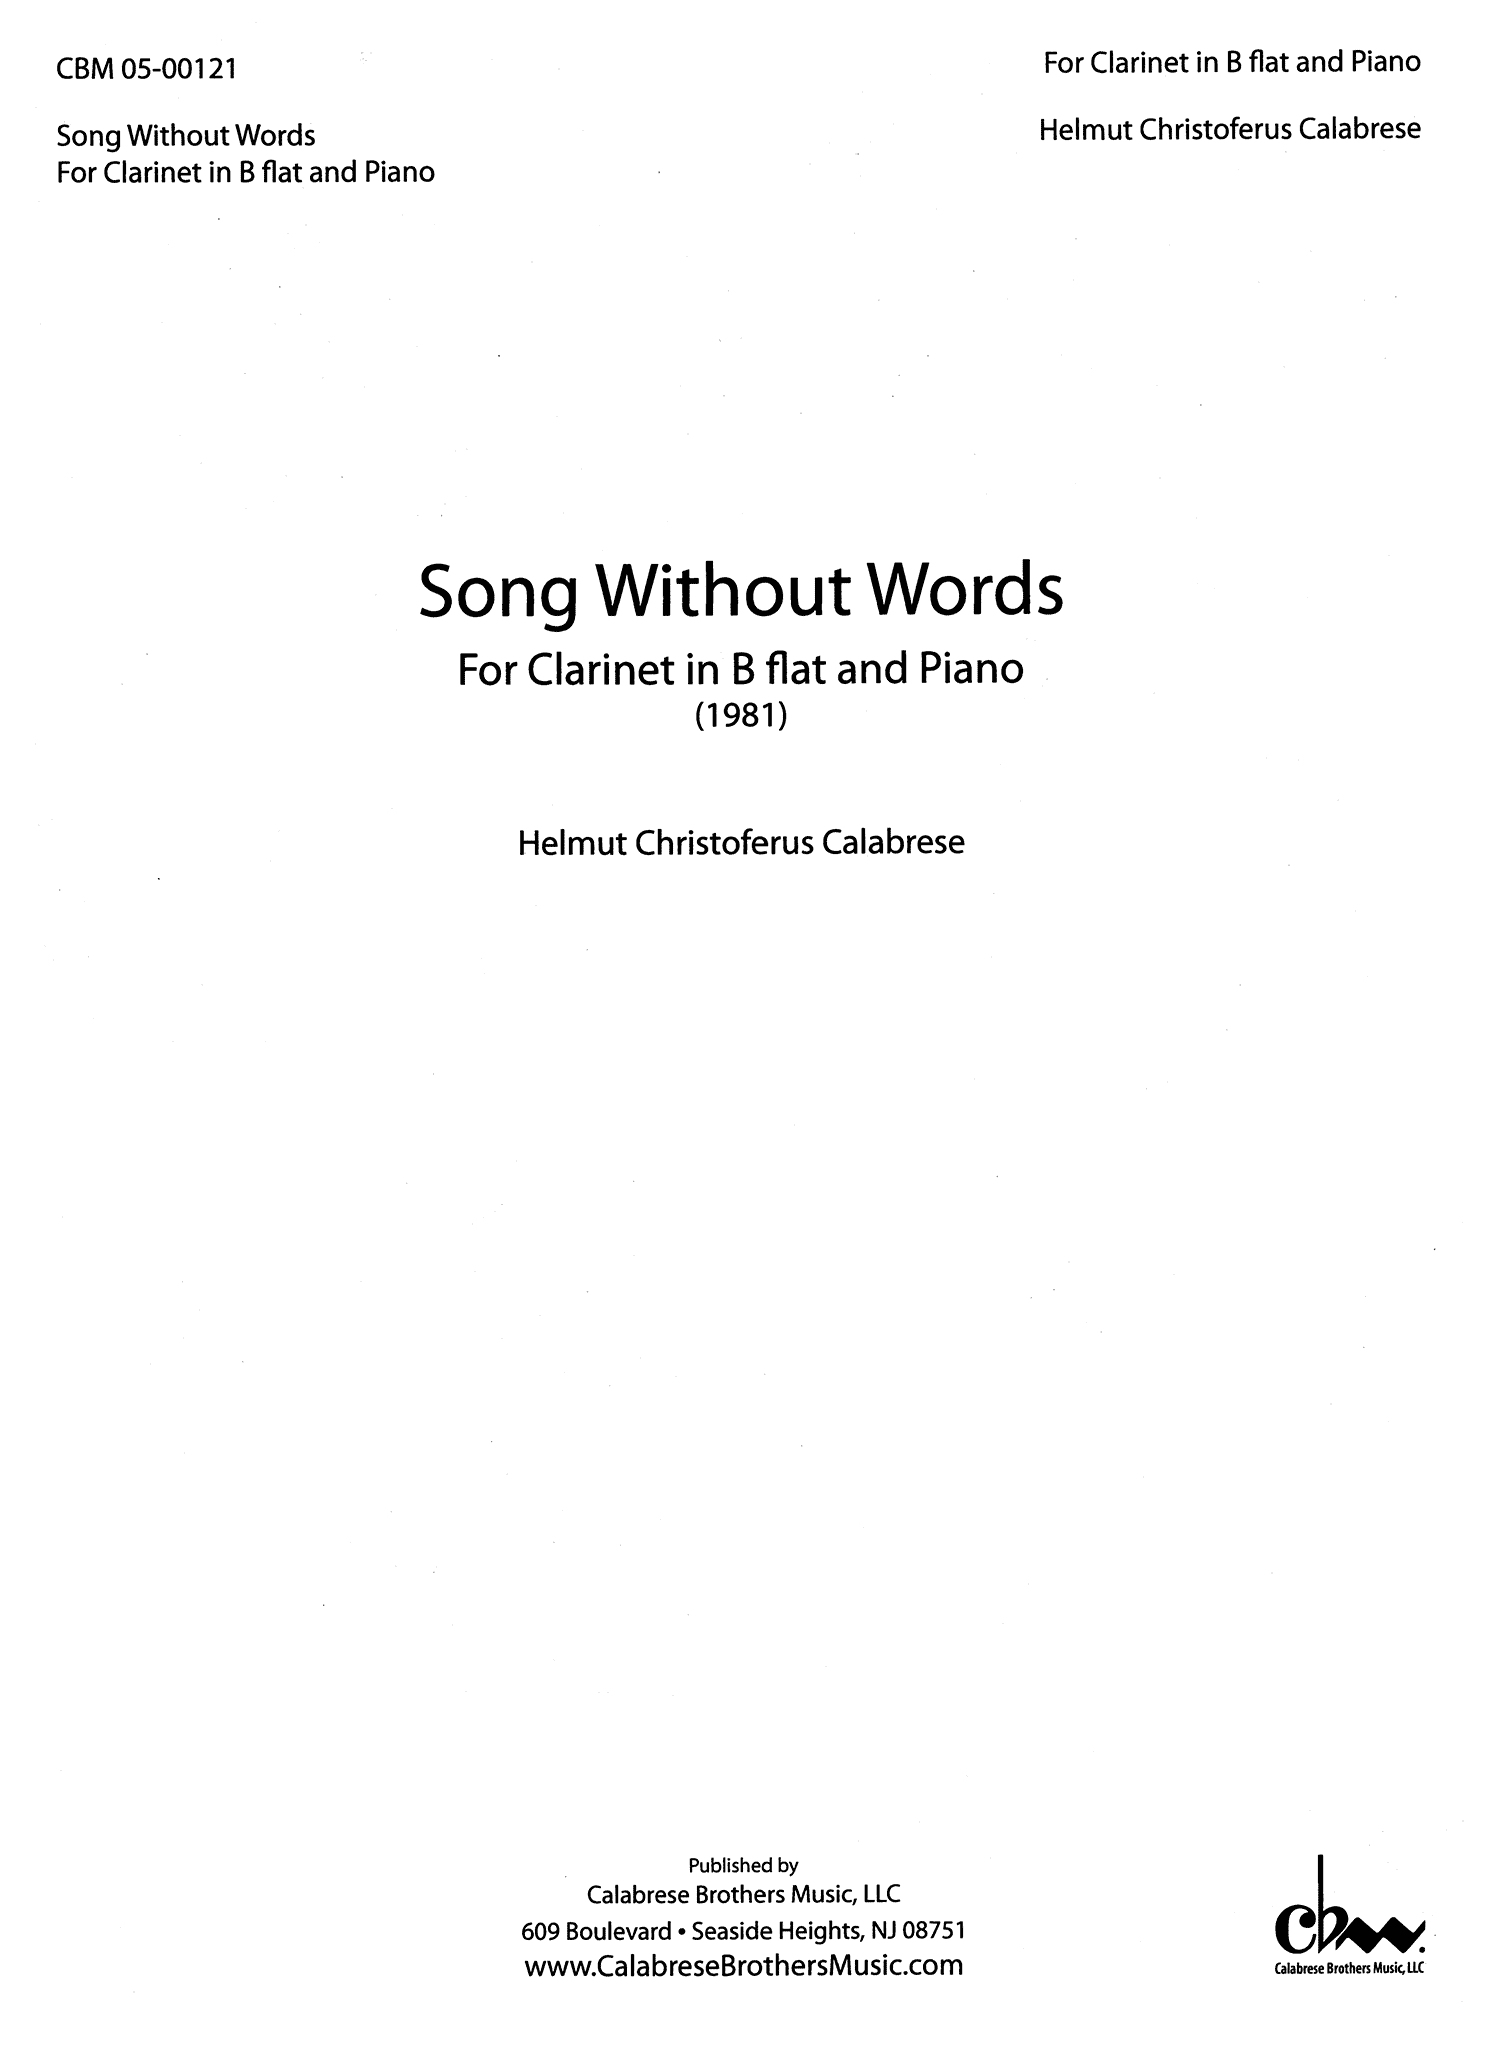 Calabrese, Helmut: Song Without Words clarinet and piano cover